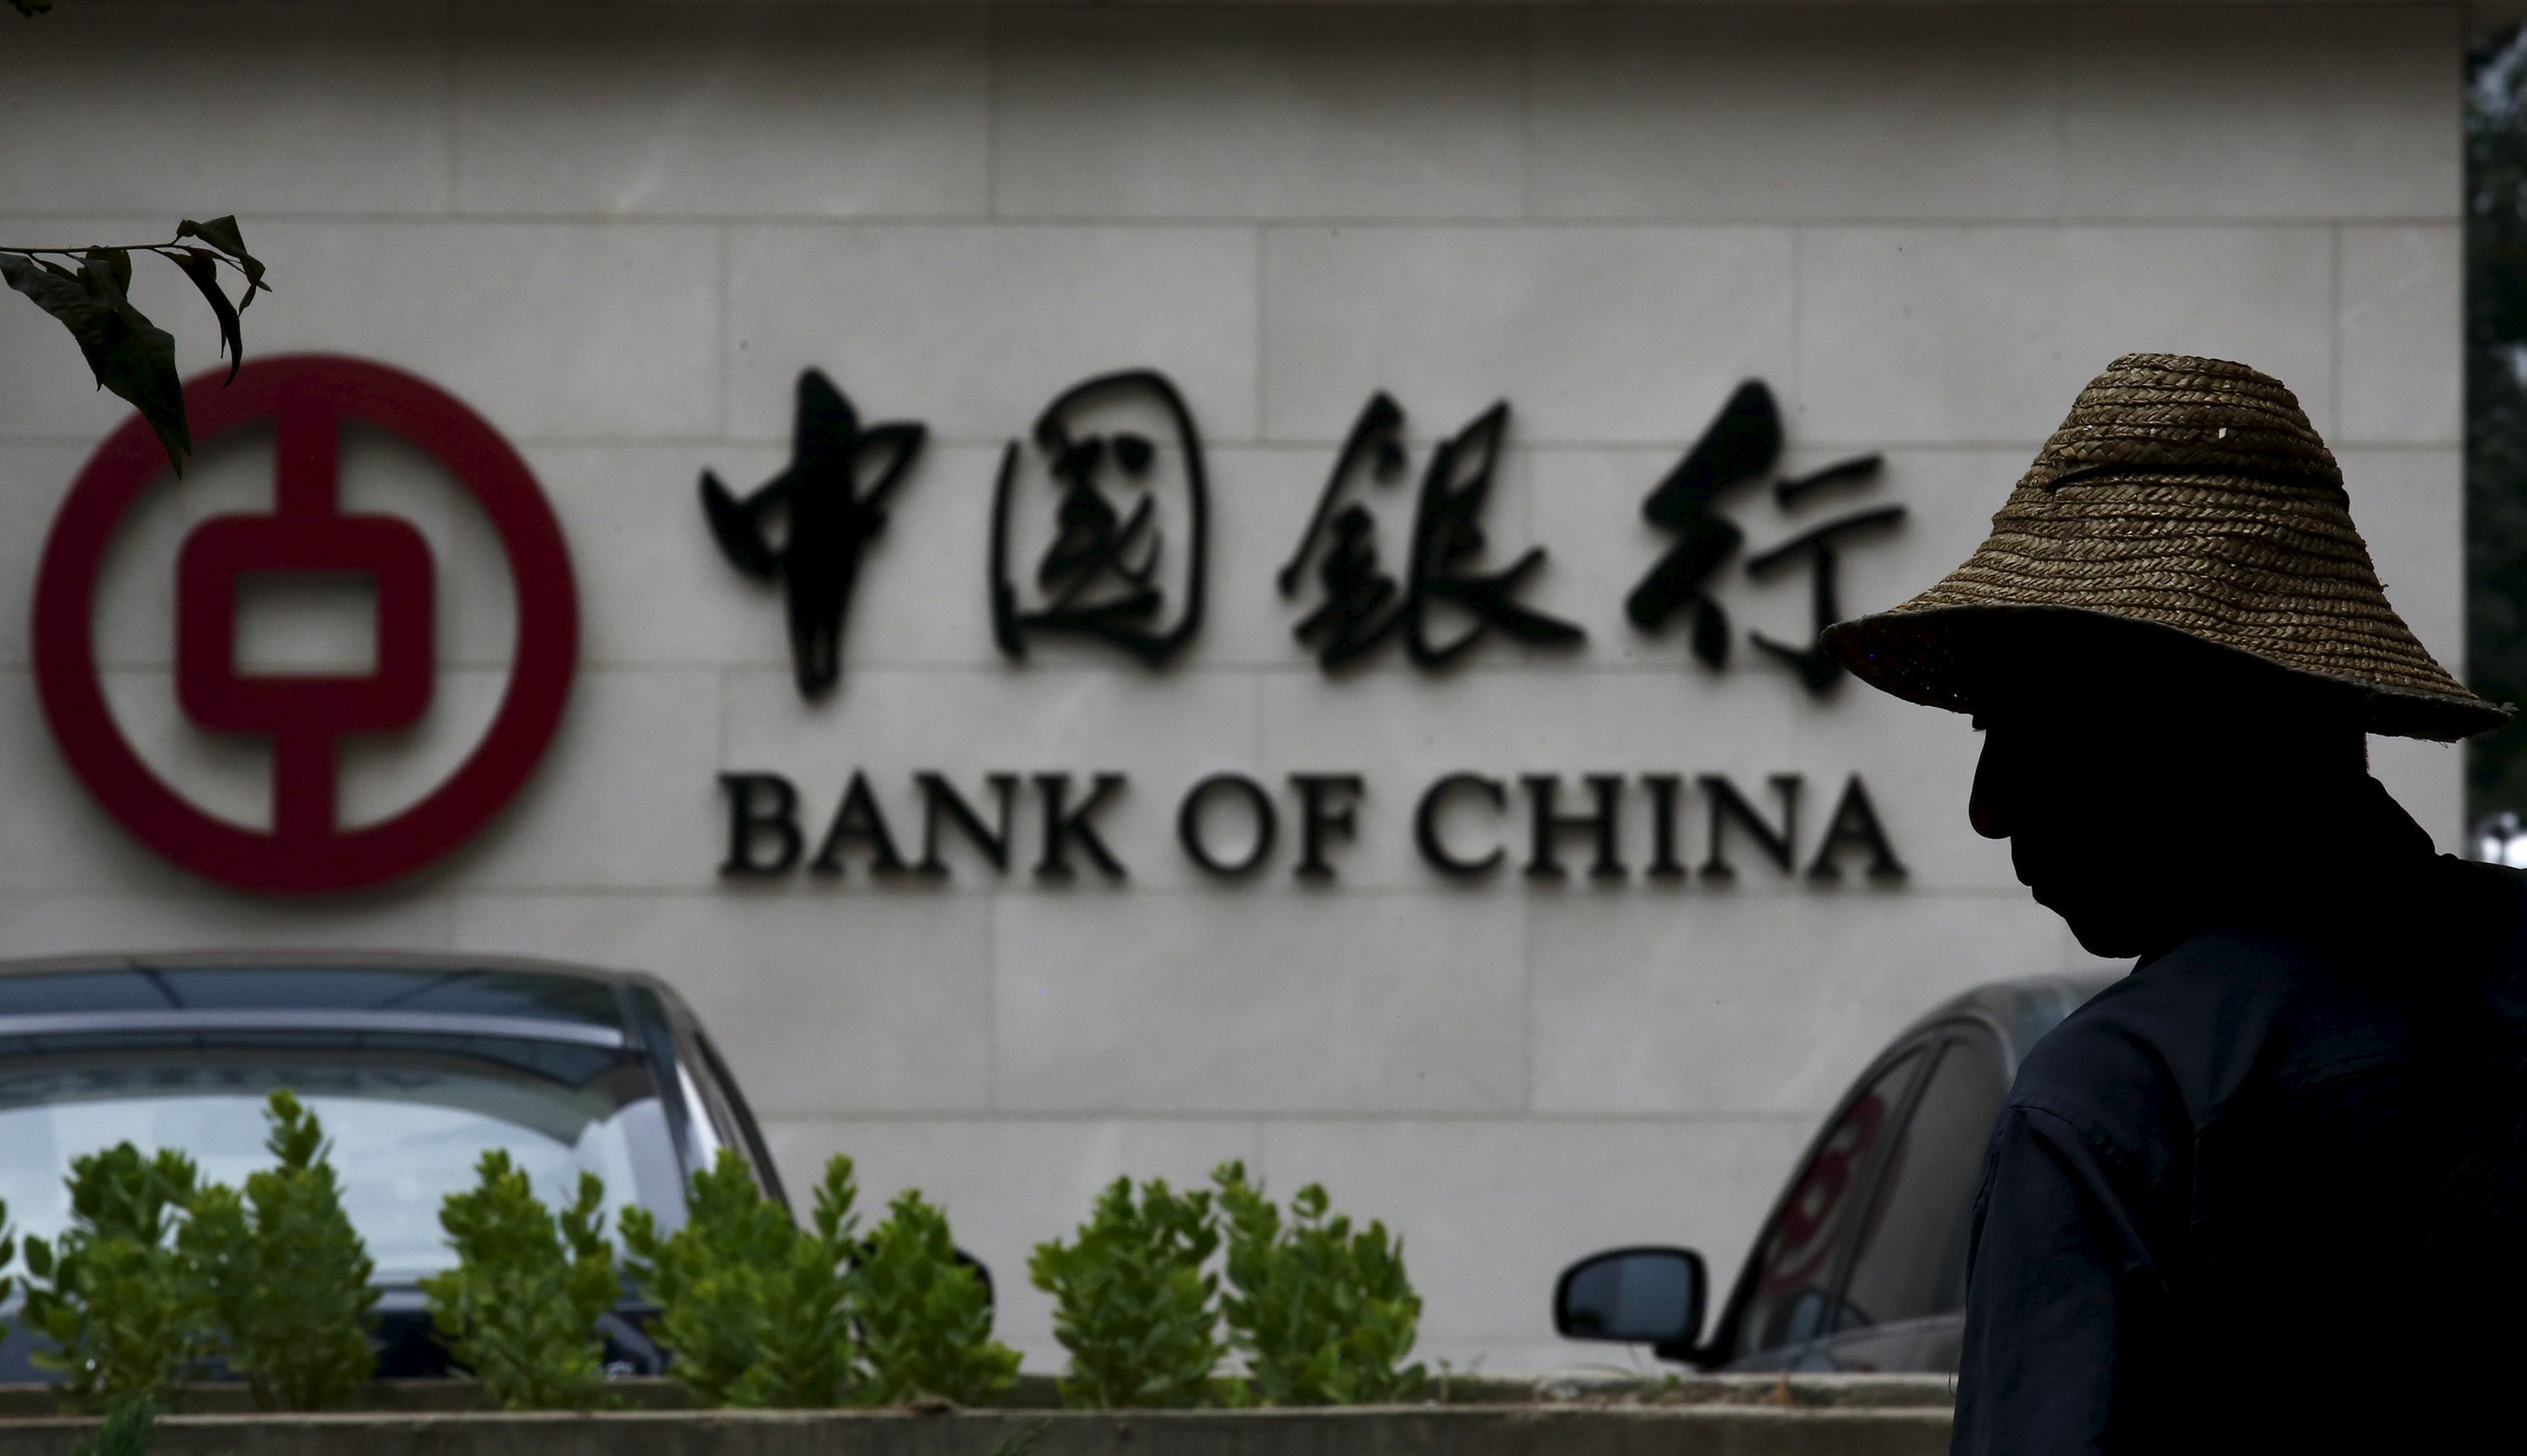 Italian prosecutors seek trial for Bank of China over money smuggling